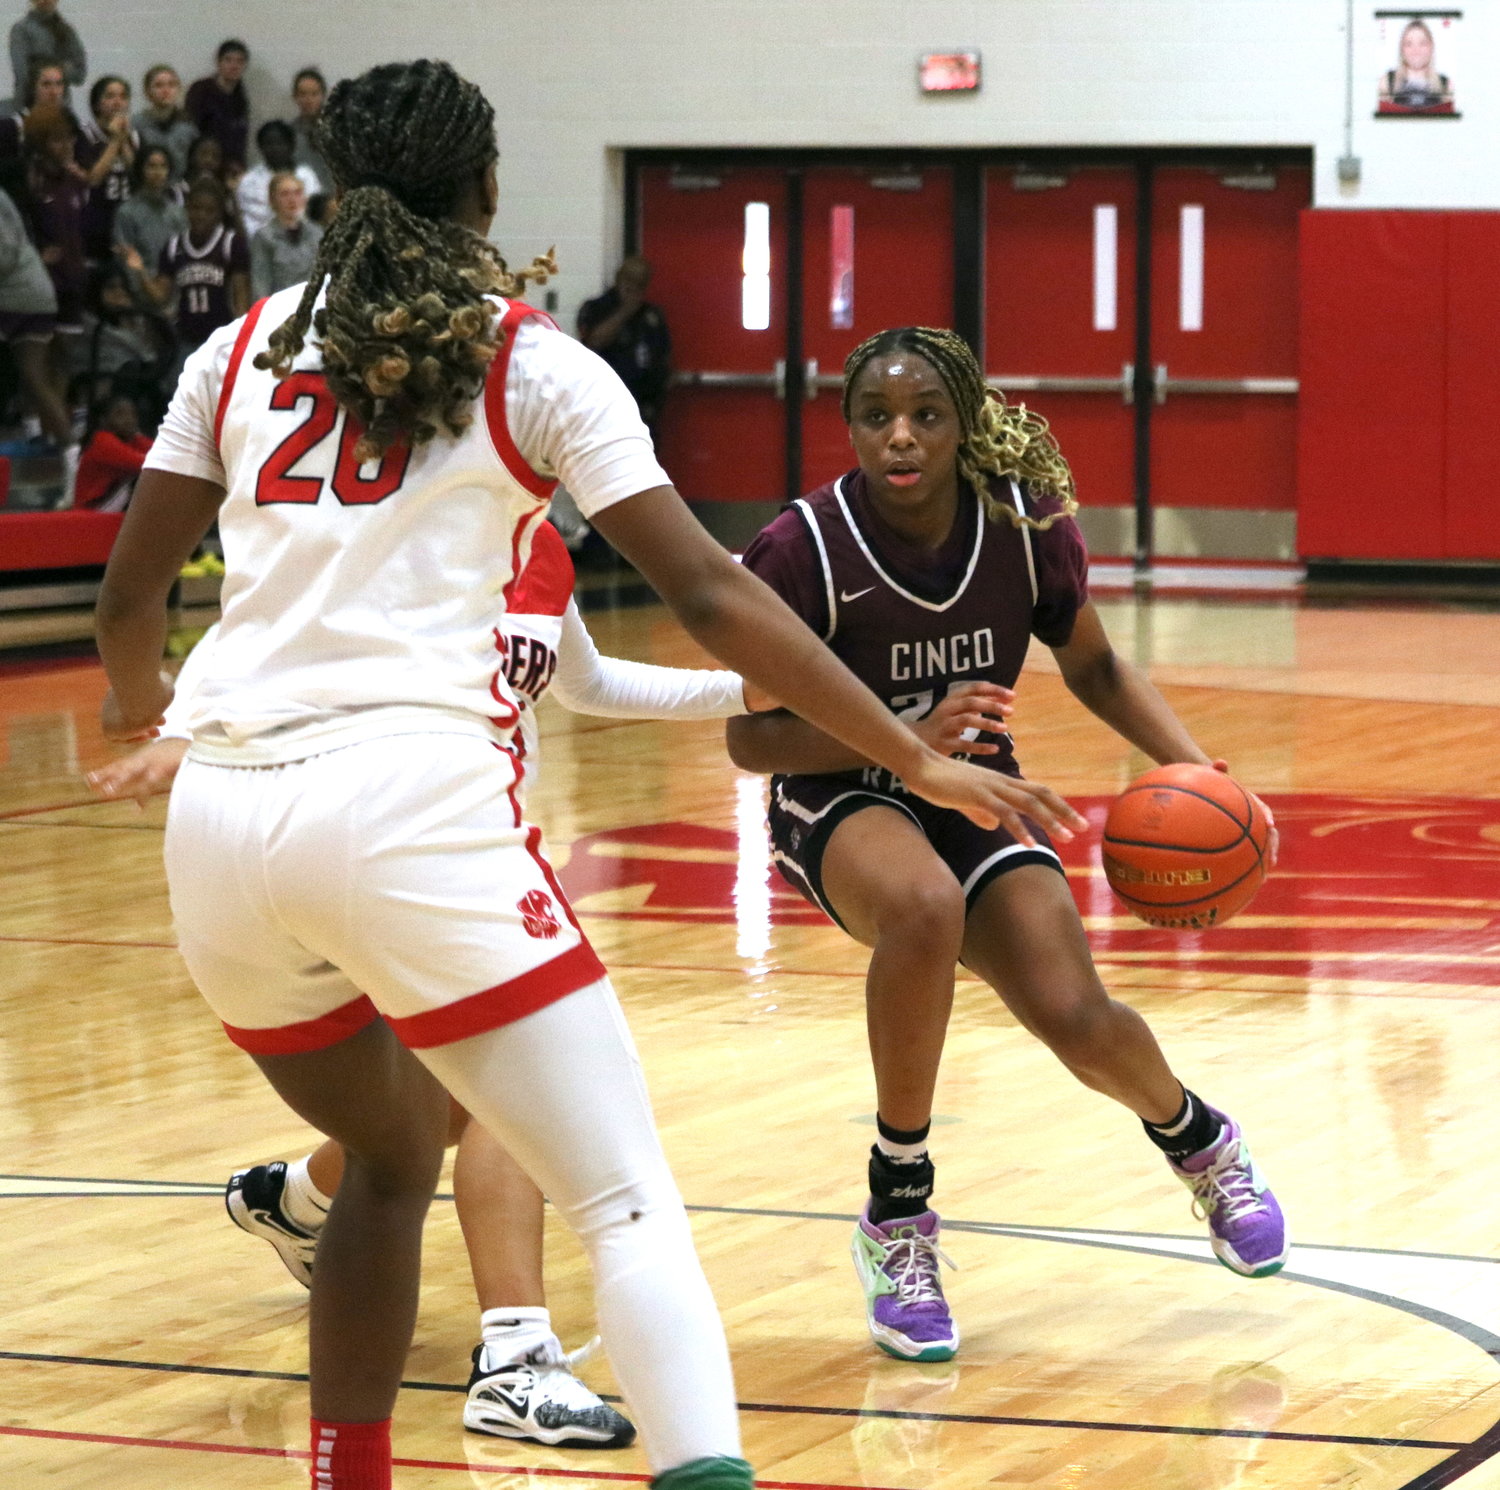 Aniya Foy dribbles around a defender during Tuesday’s game between Katy and Cinco Ranch at the Katy gym.